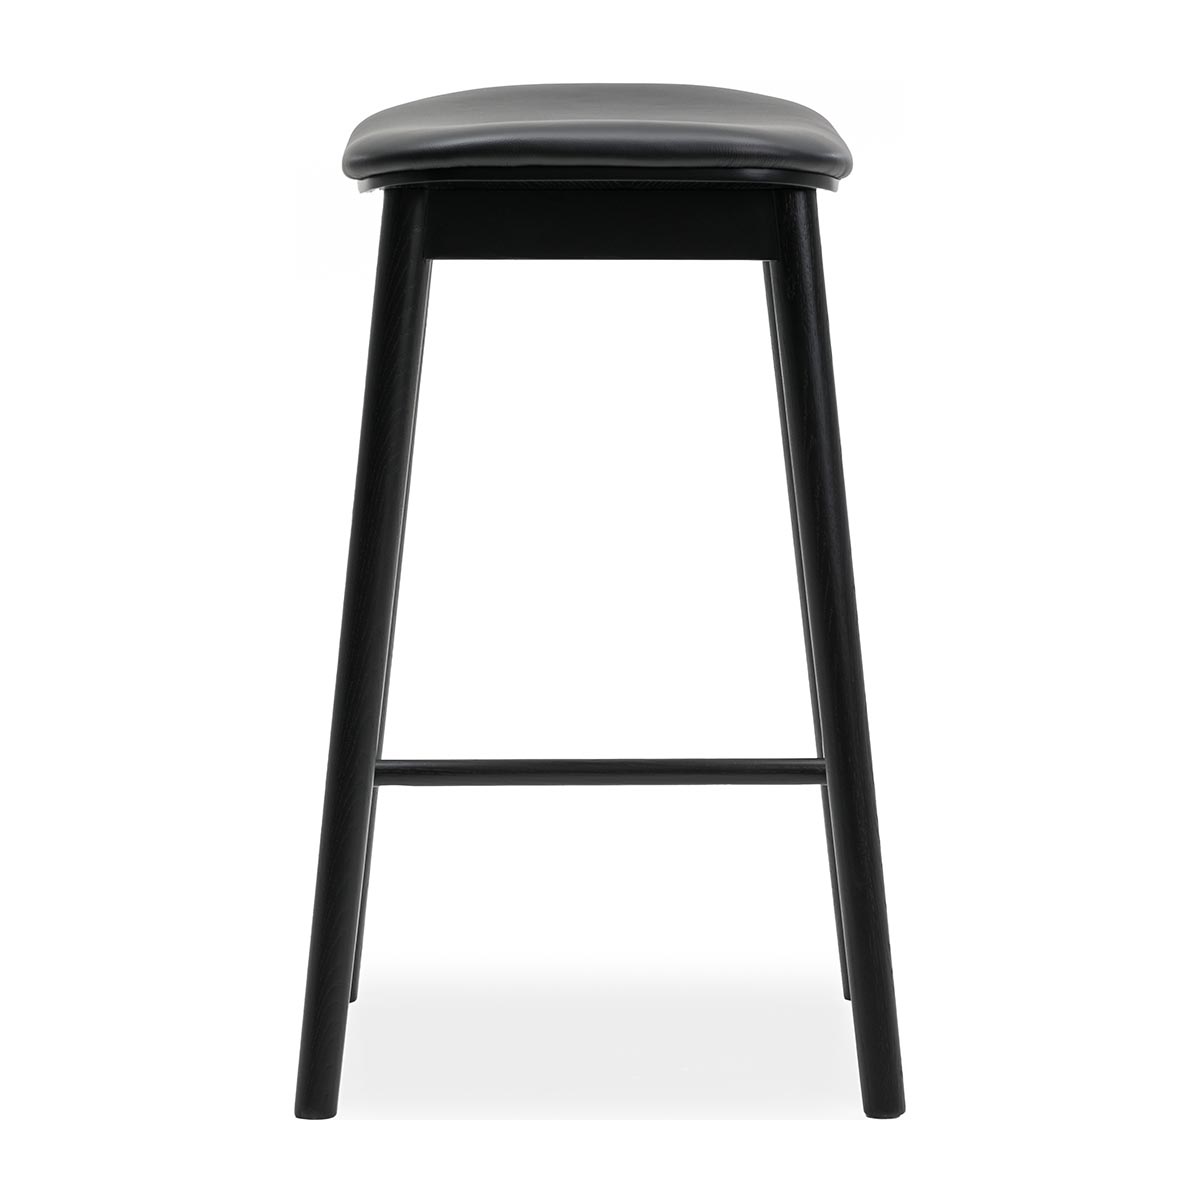 Black Leather Backless Bar Stools Top, Black Leather Backless Counter Stools